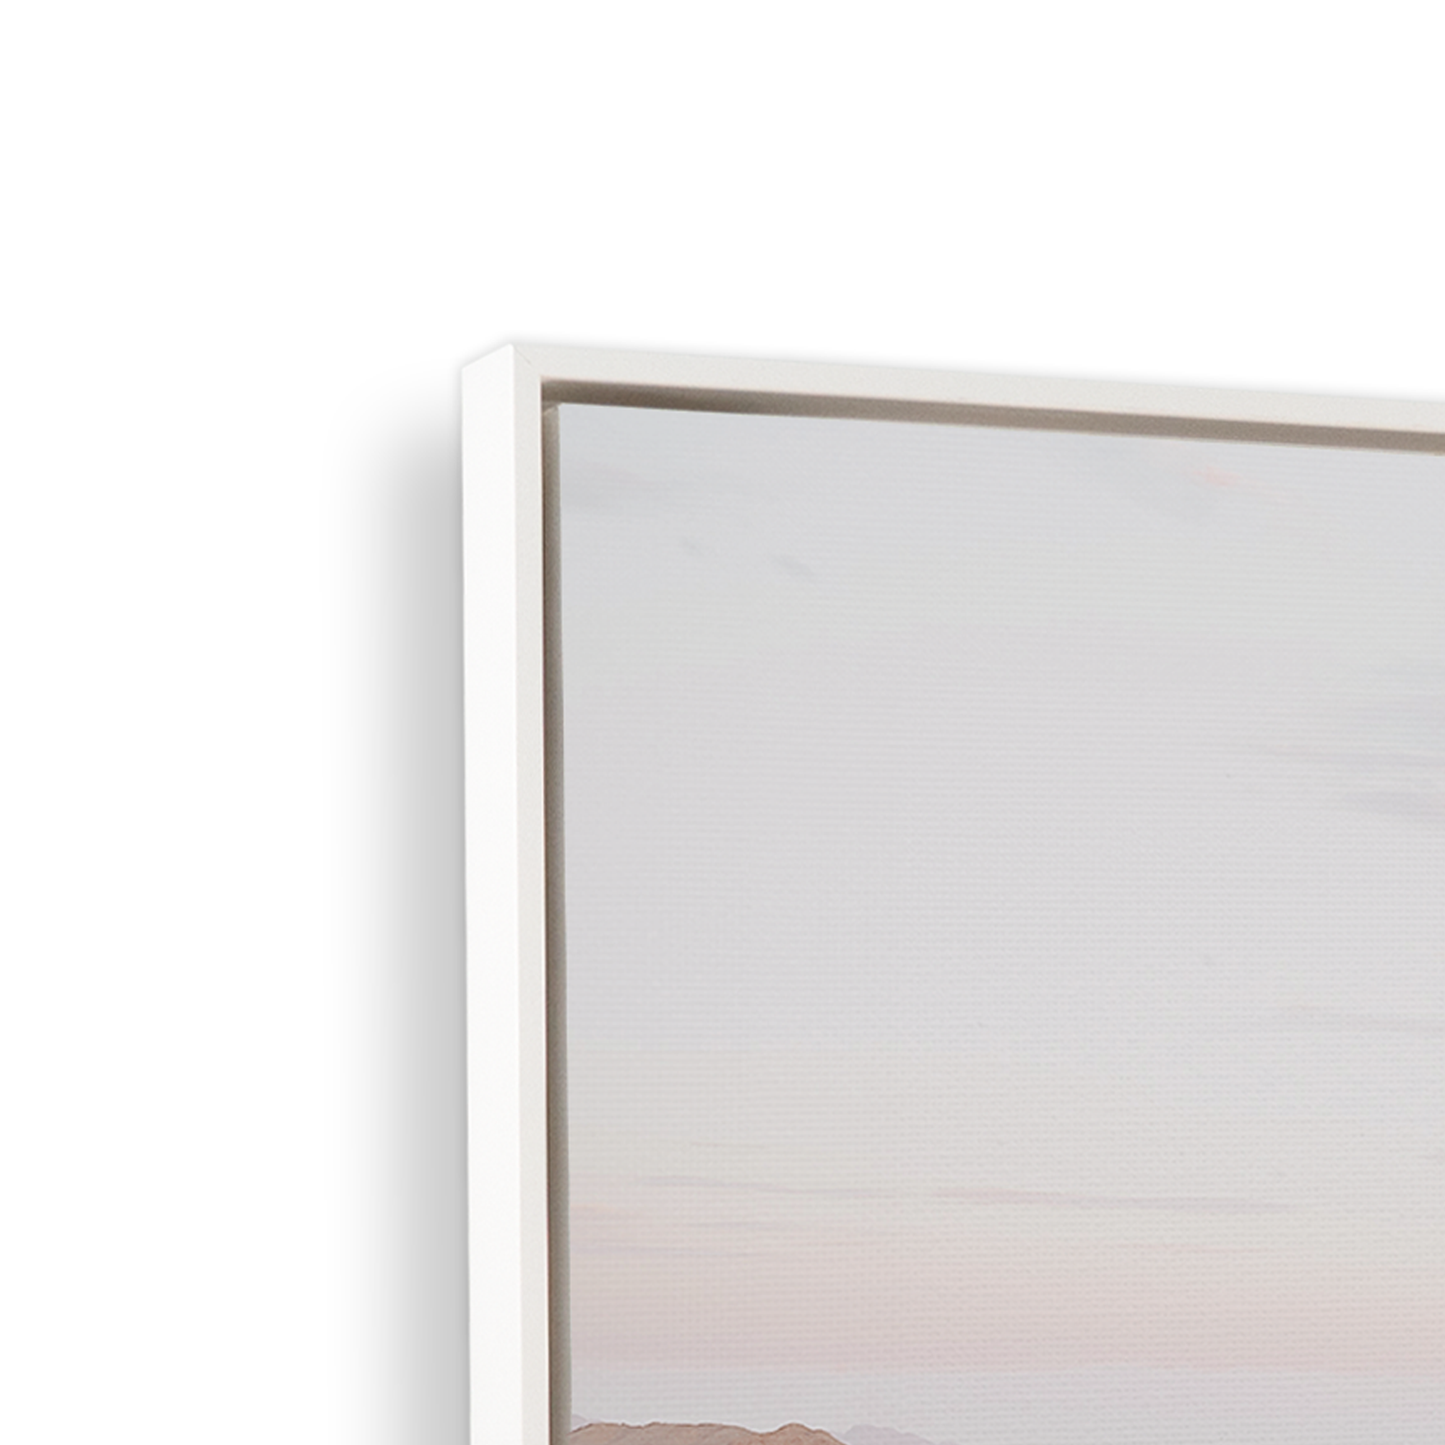 [color:Satin White], Picture of the corner of the frame